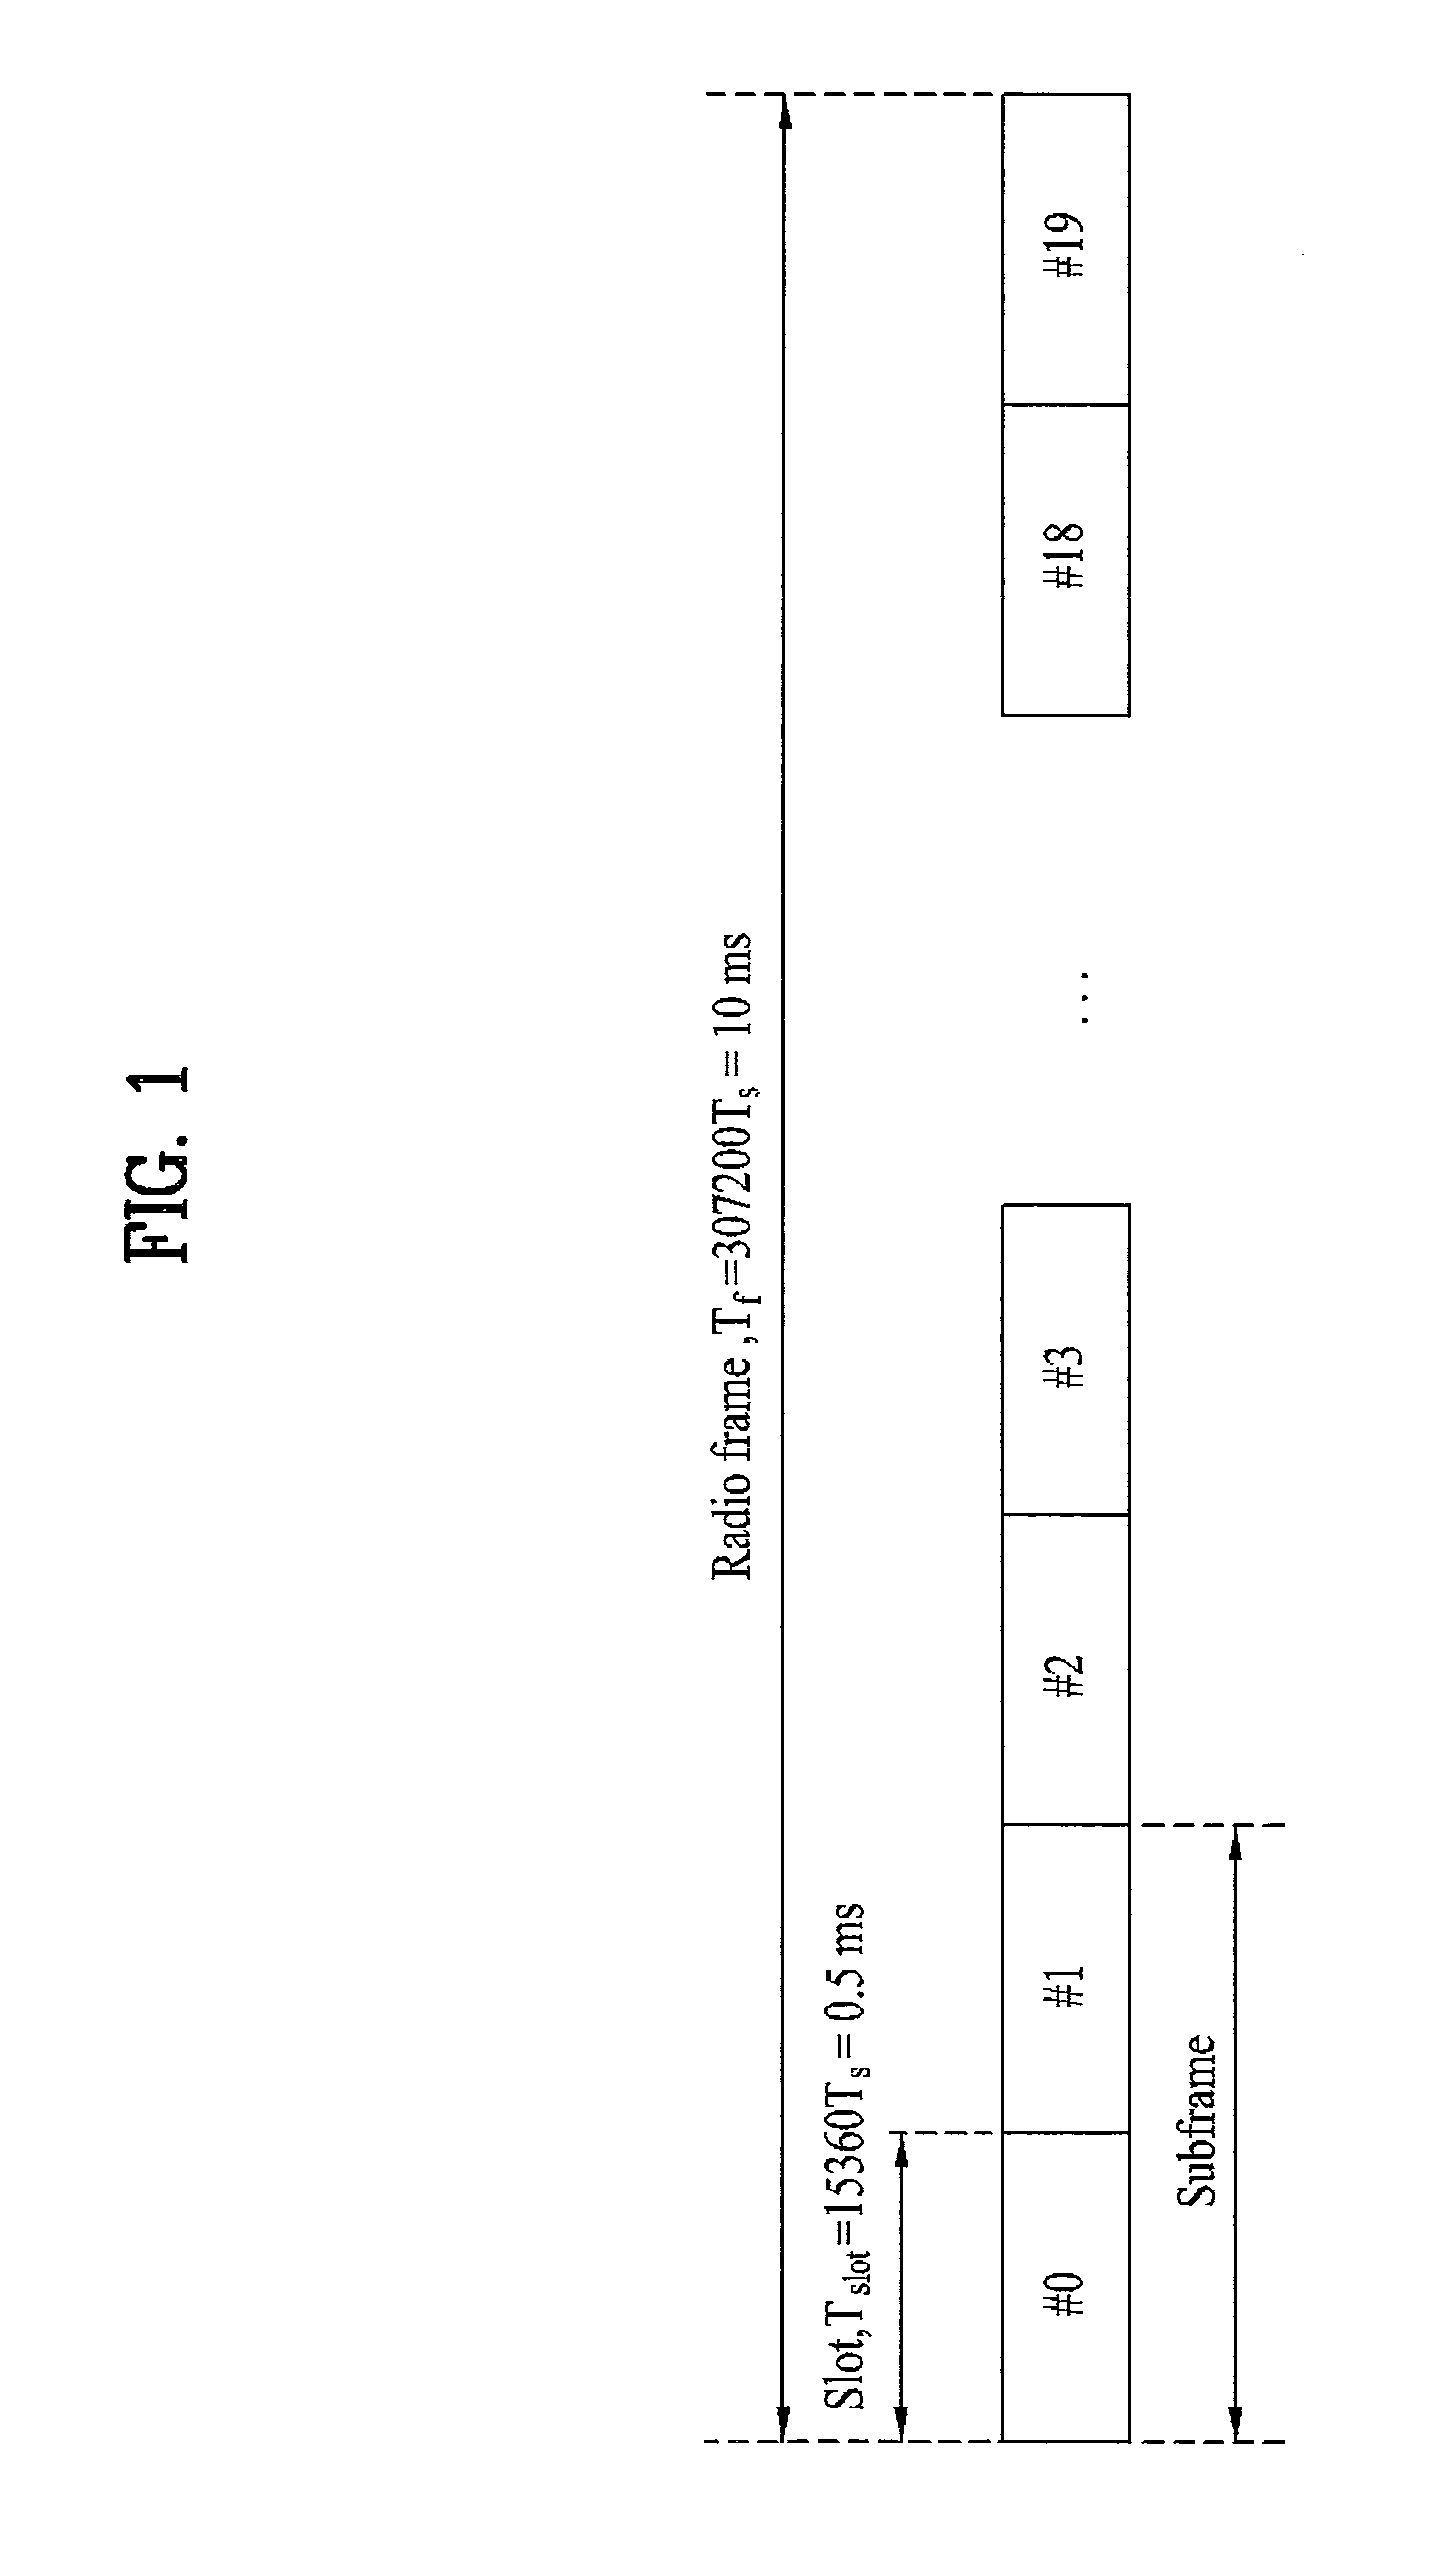 Method and apparatus for indicating deactivation of semi-persistent scheduling